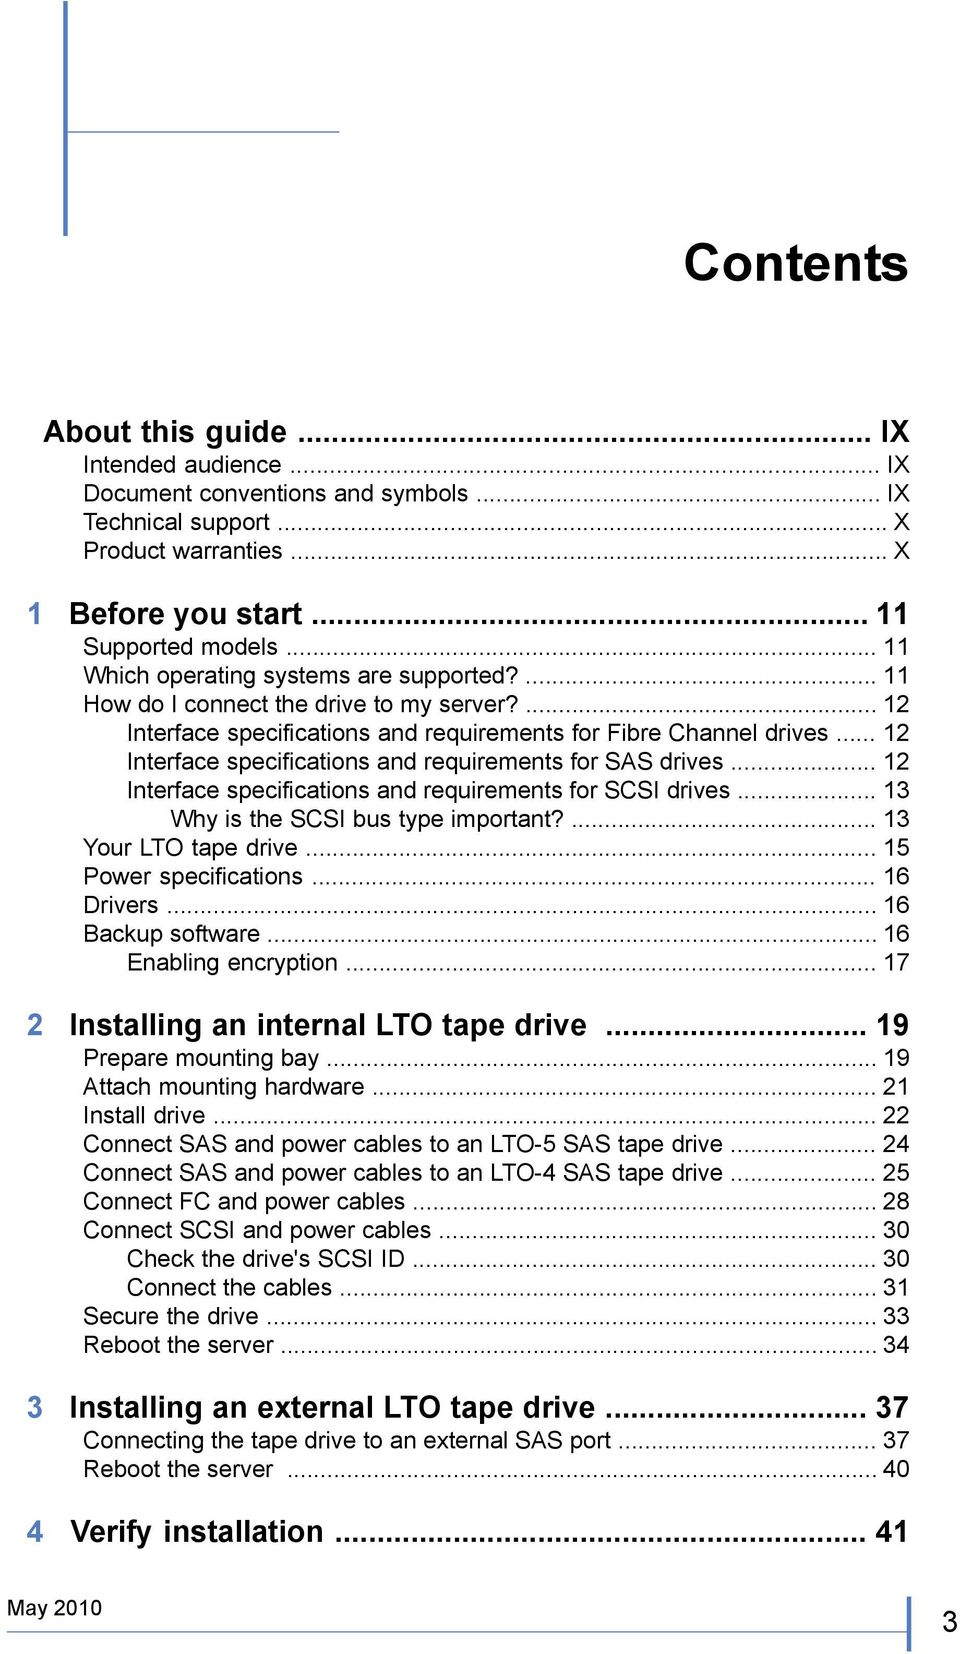 .. 12..Interface specifications and requirements for SCSI drives... 13..Why is the SCSI bus type important?... 13..Your LTO tape drive... 15..Power specifications... 16..Drivers... 16..Backup software.